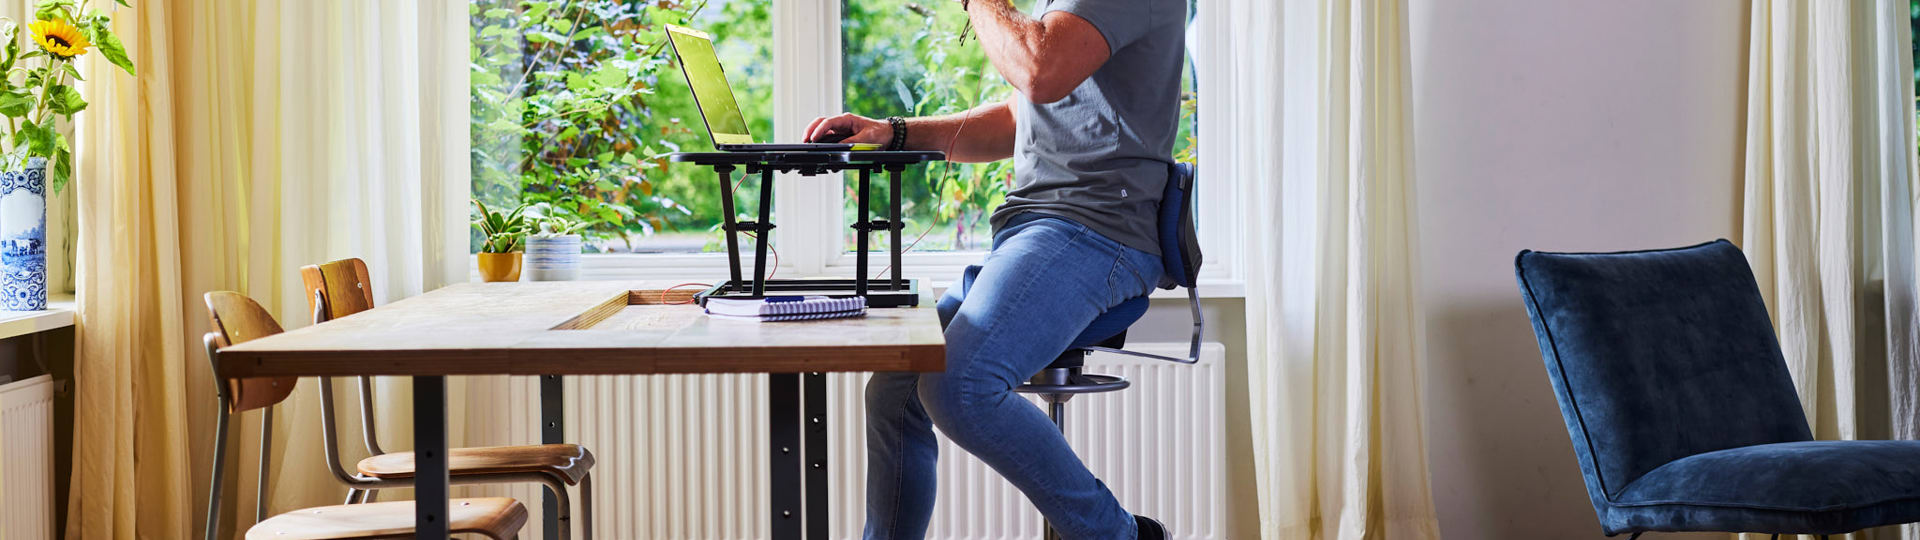 The Balance mechanism by Score: the way to sit and work ergonomically!